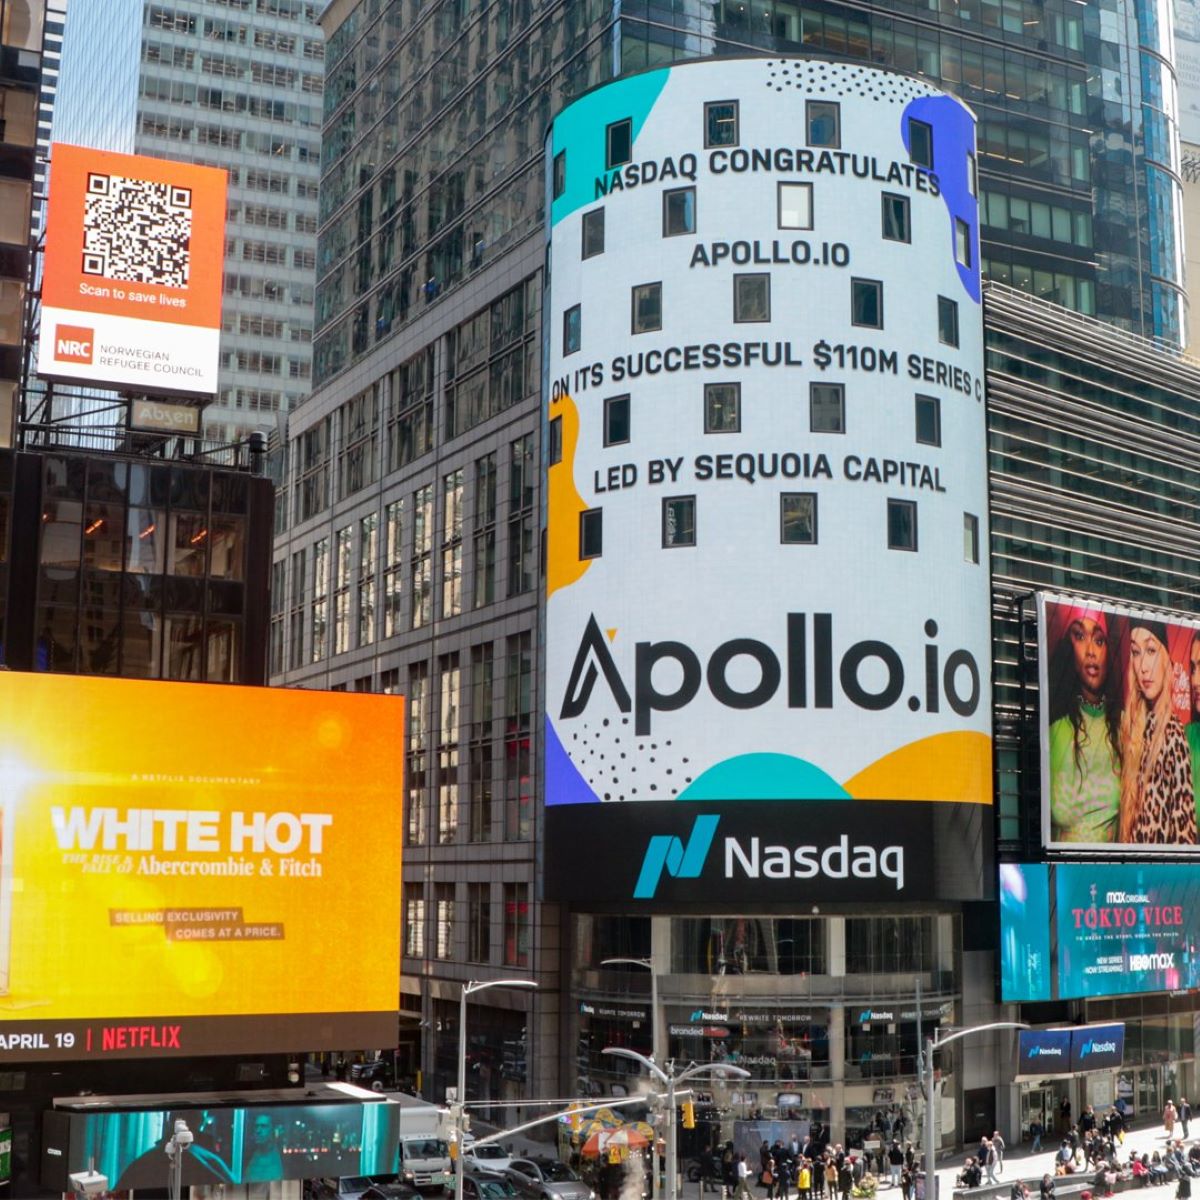 apollo-io-secures-100m-funding-at-a-valuation-of-1-6b-accelerating-the-growth-of-its-sales-tech-platform